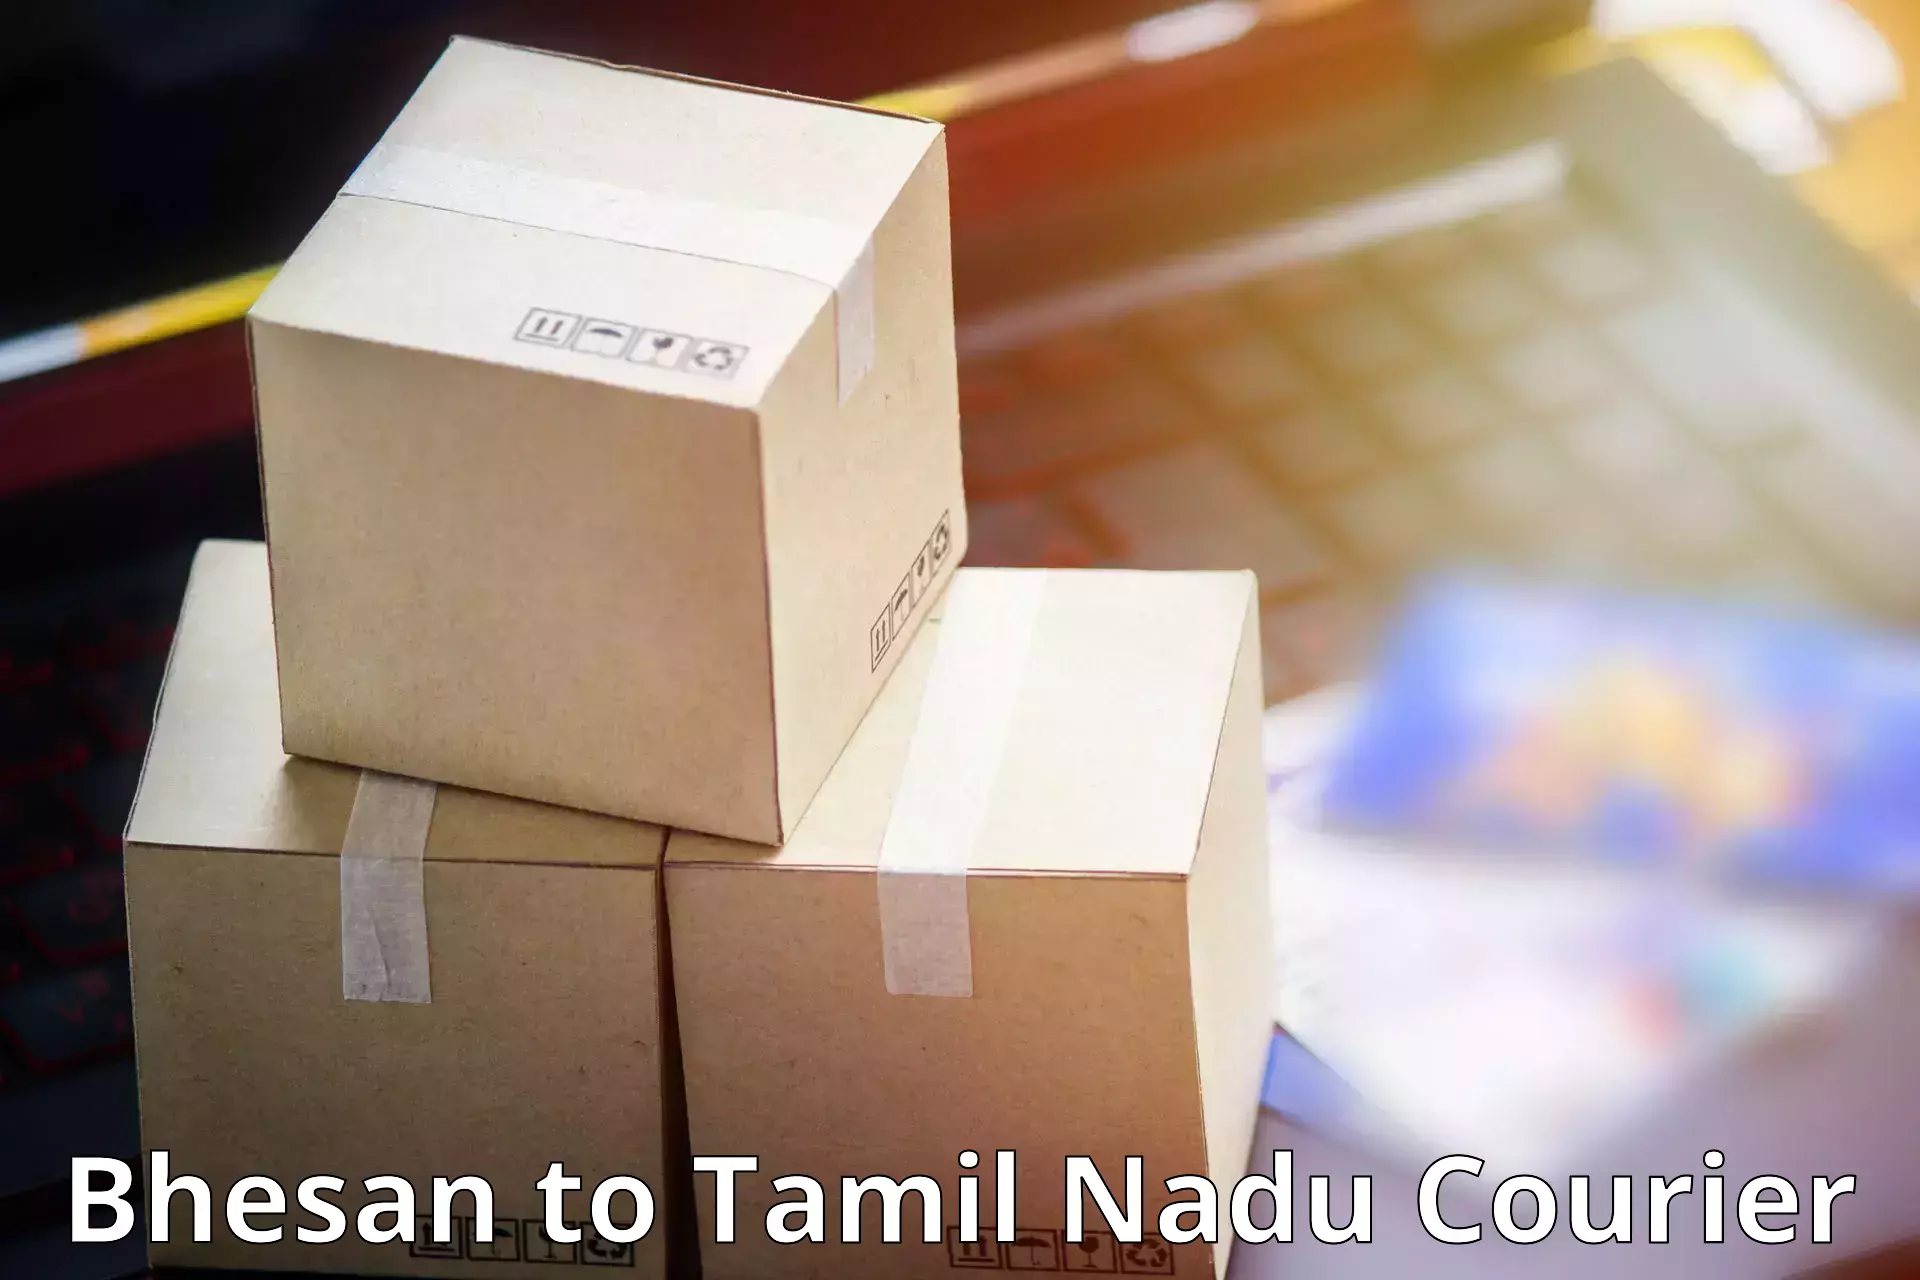 Professional courier handling in Bhesan to Chennai Port